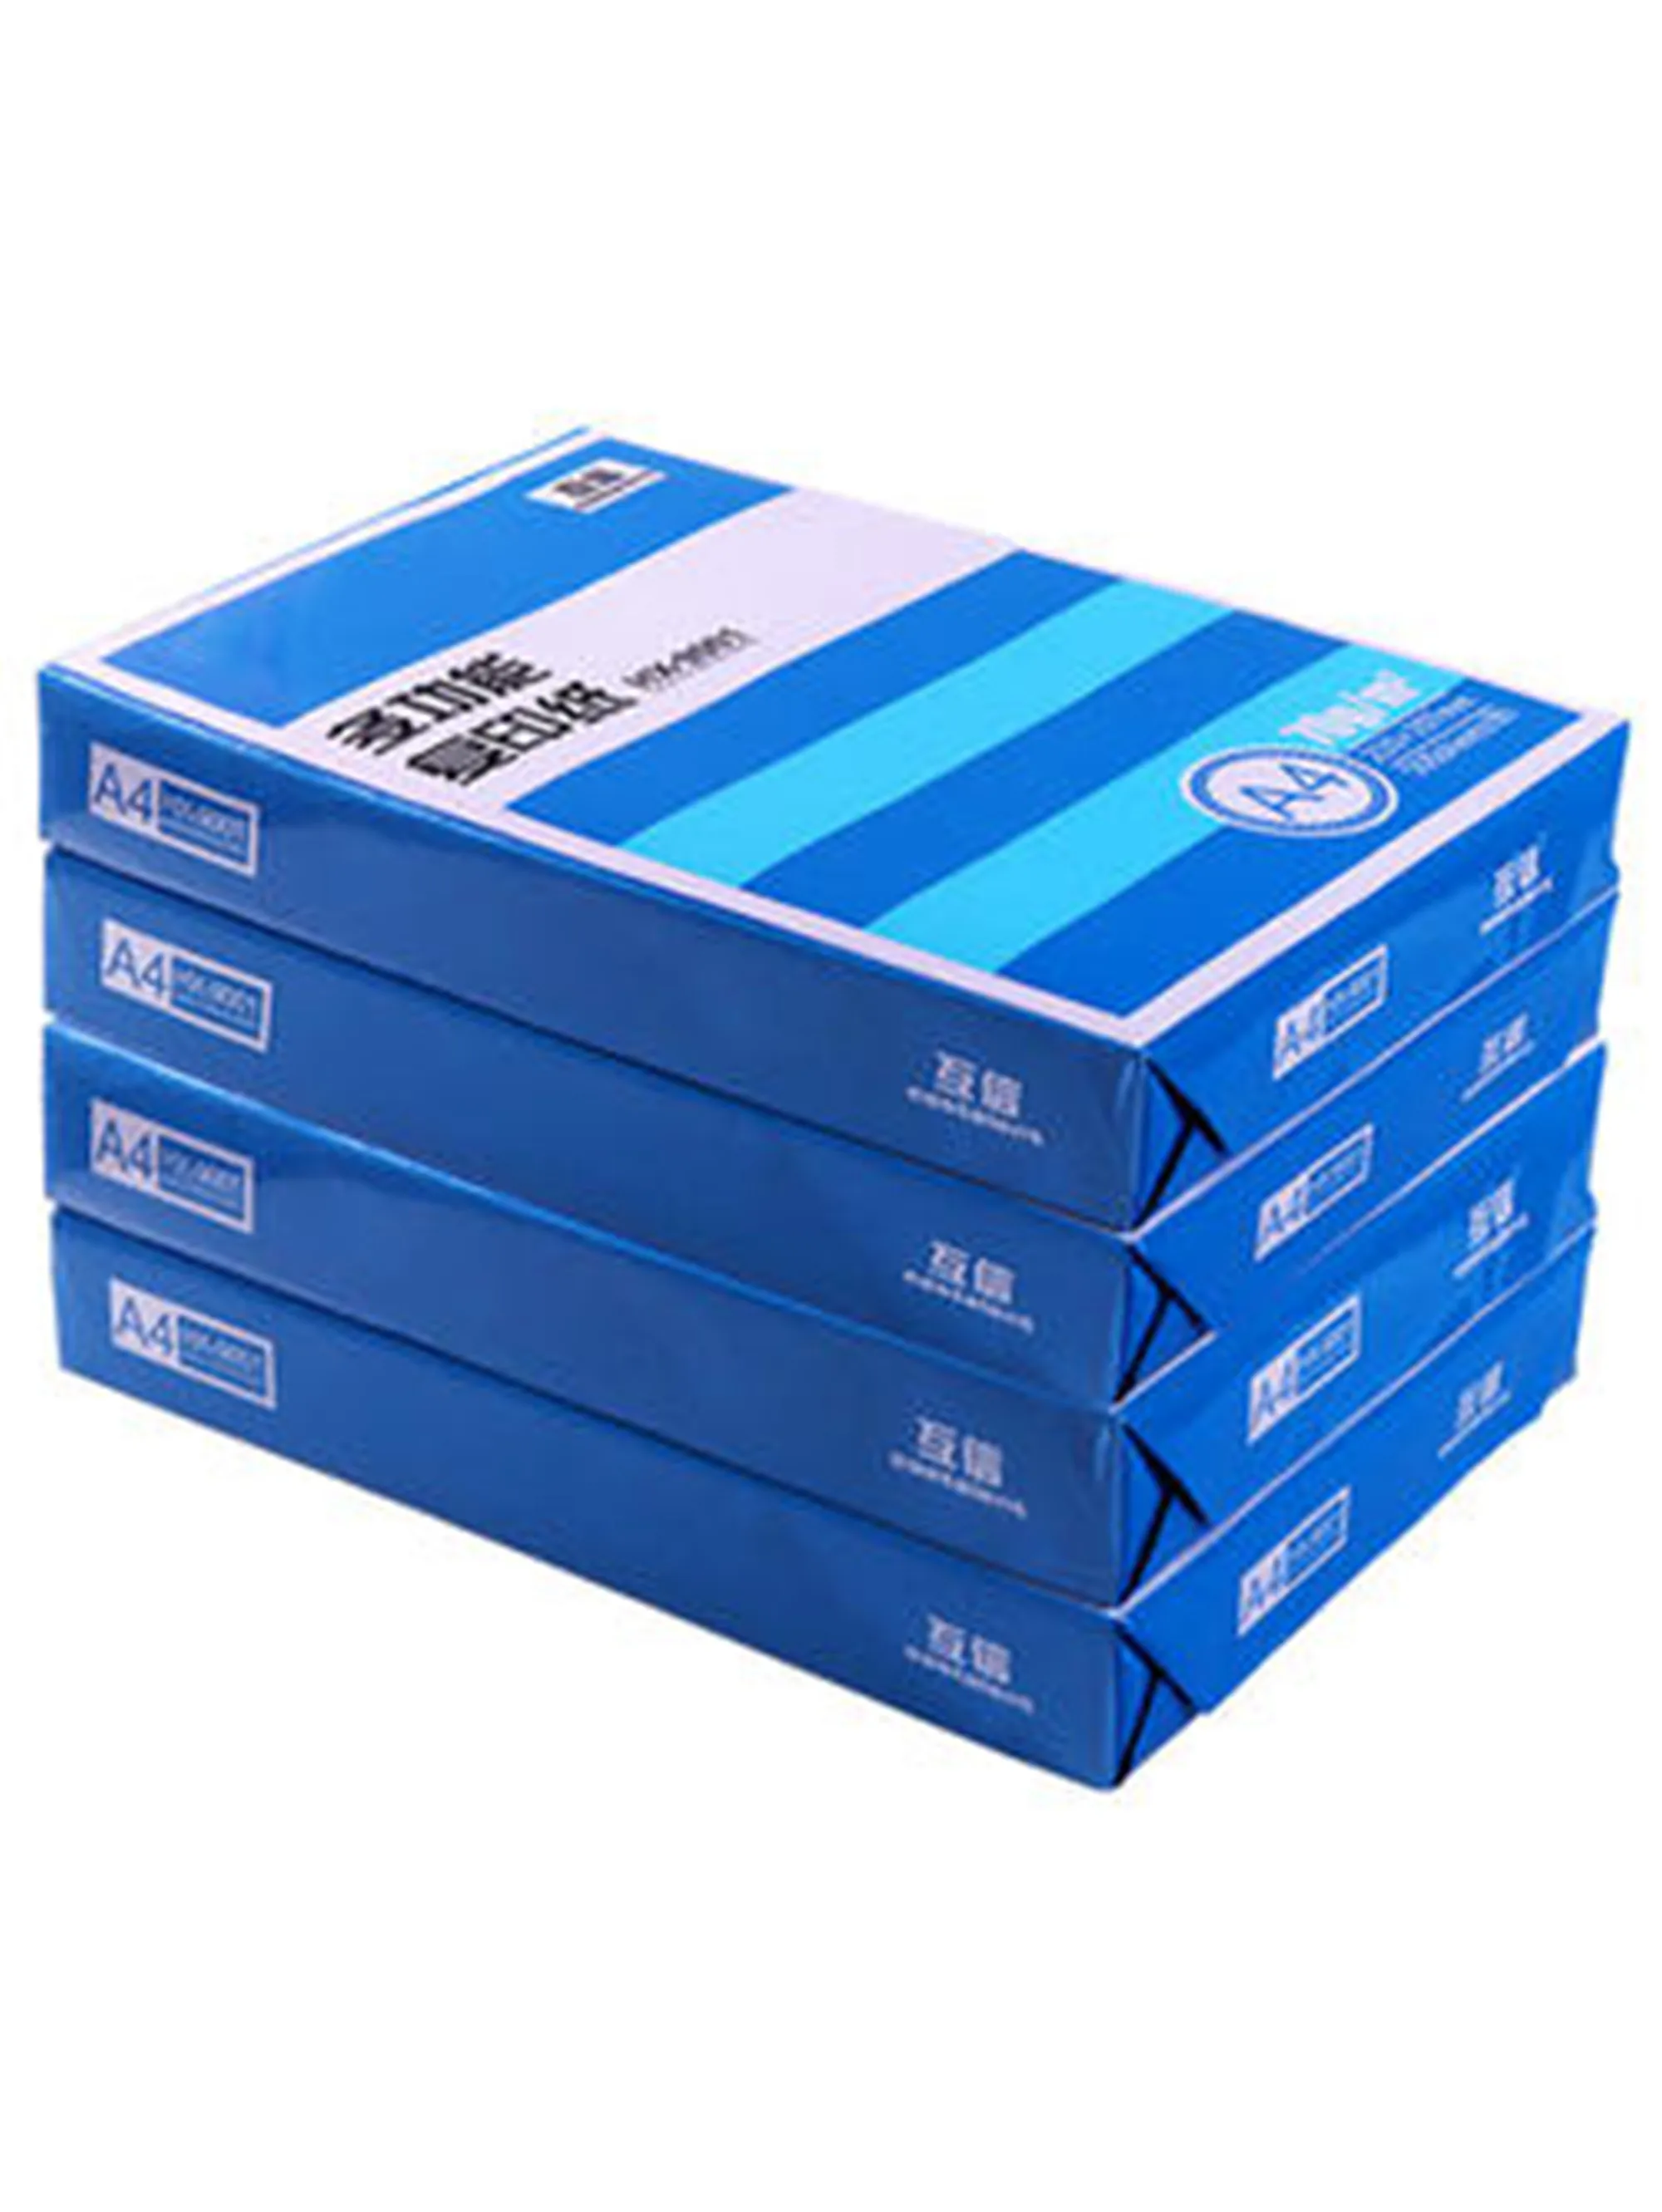 
Professional Office 80gsm Mutual Trust A4 Size Copier Paper 